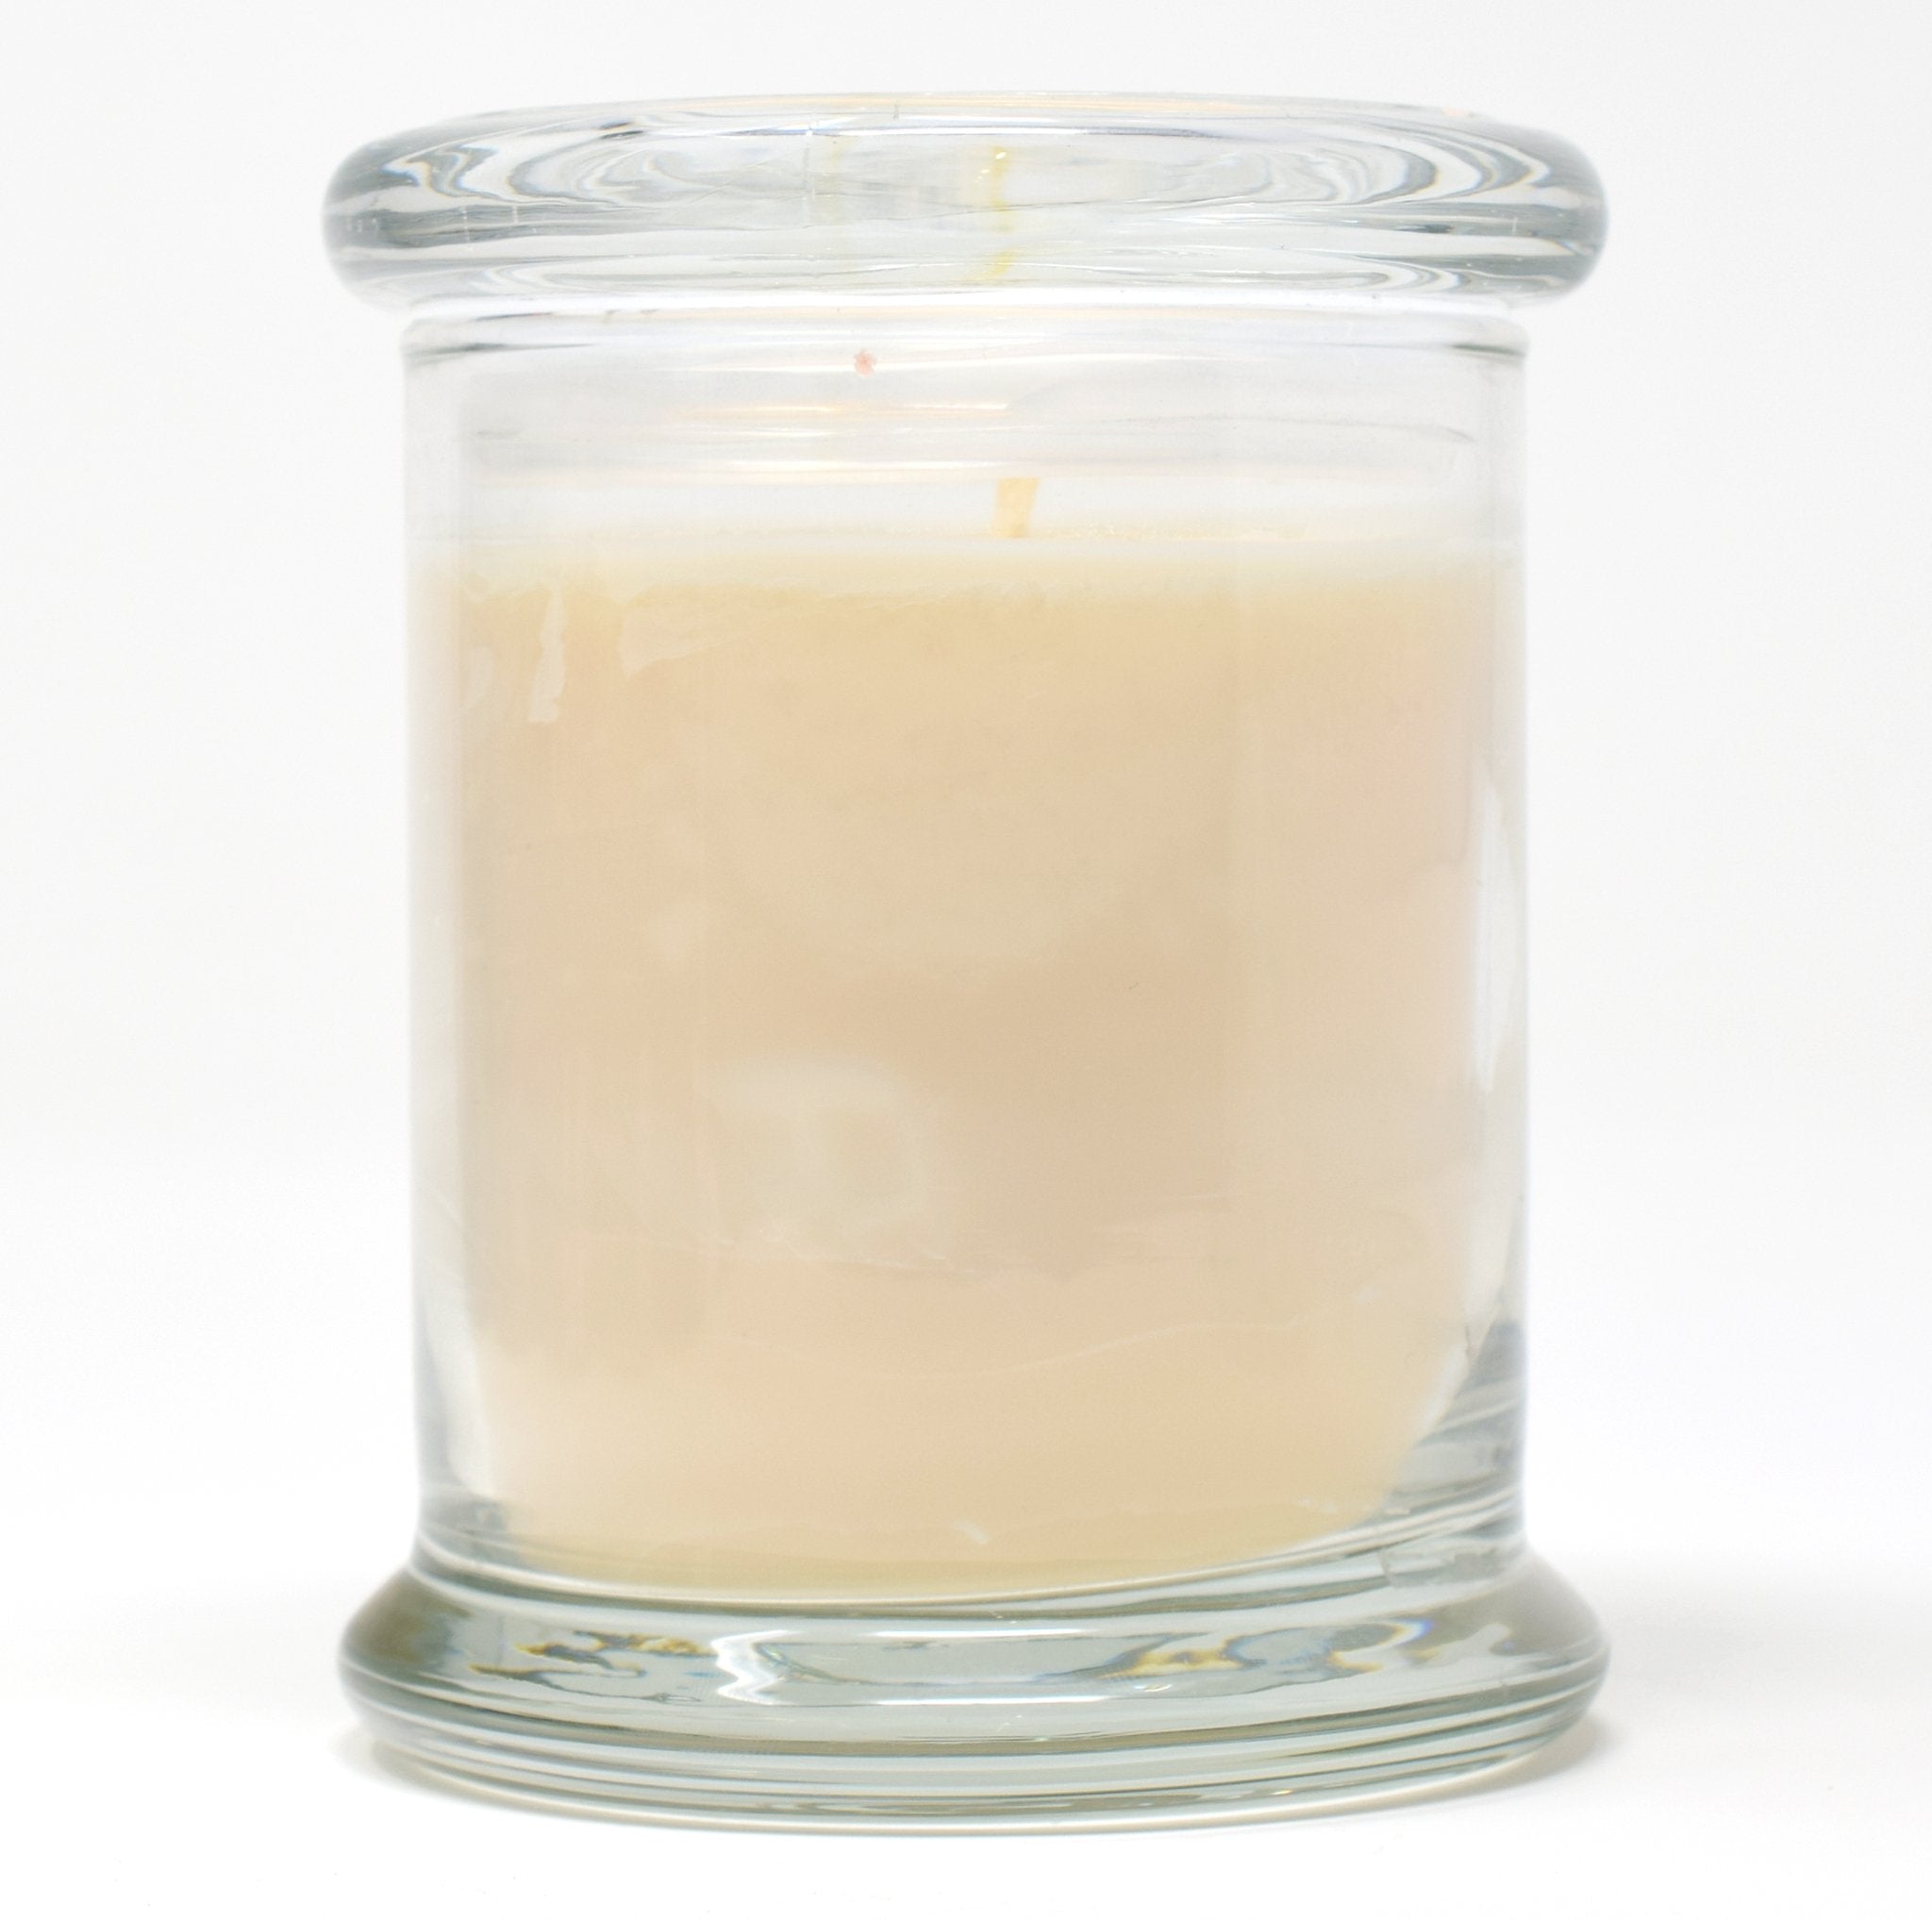 Peppermint Essential Oil, 9oz Soy Candle Jar - Candeo Candle